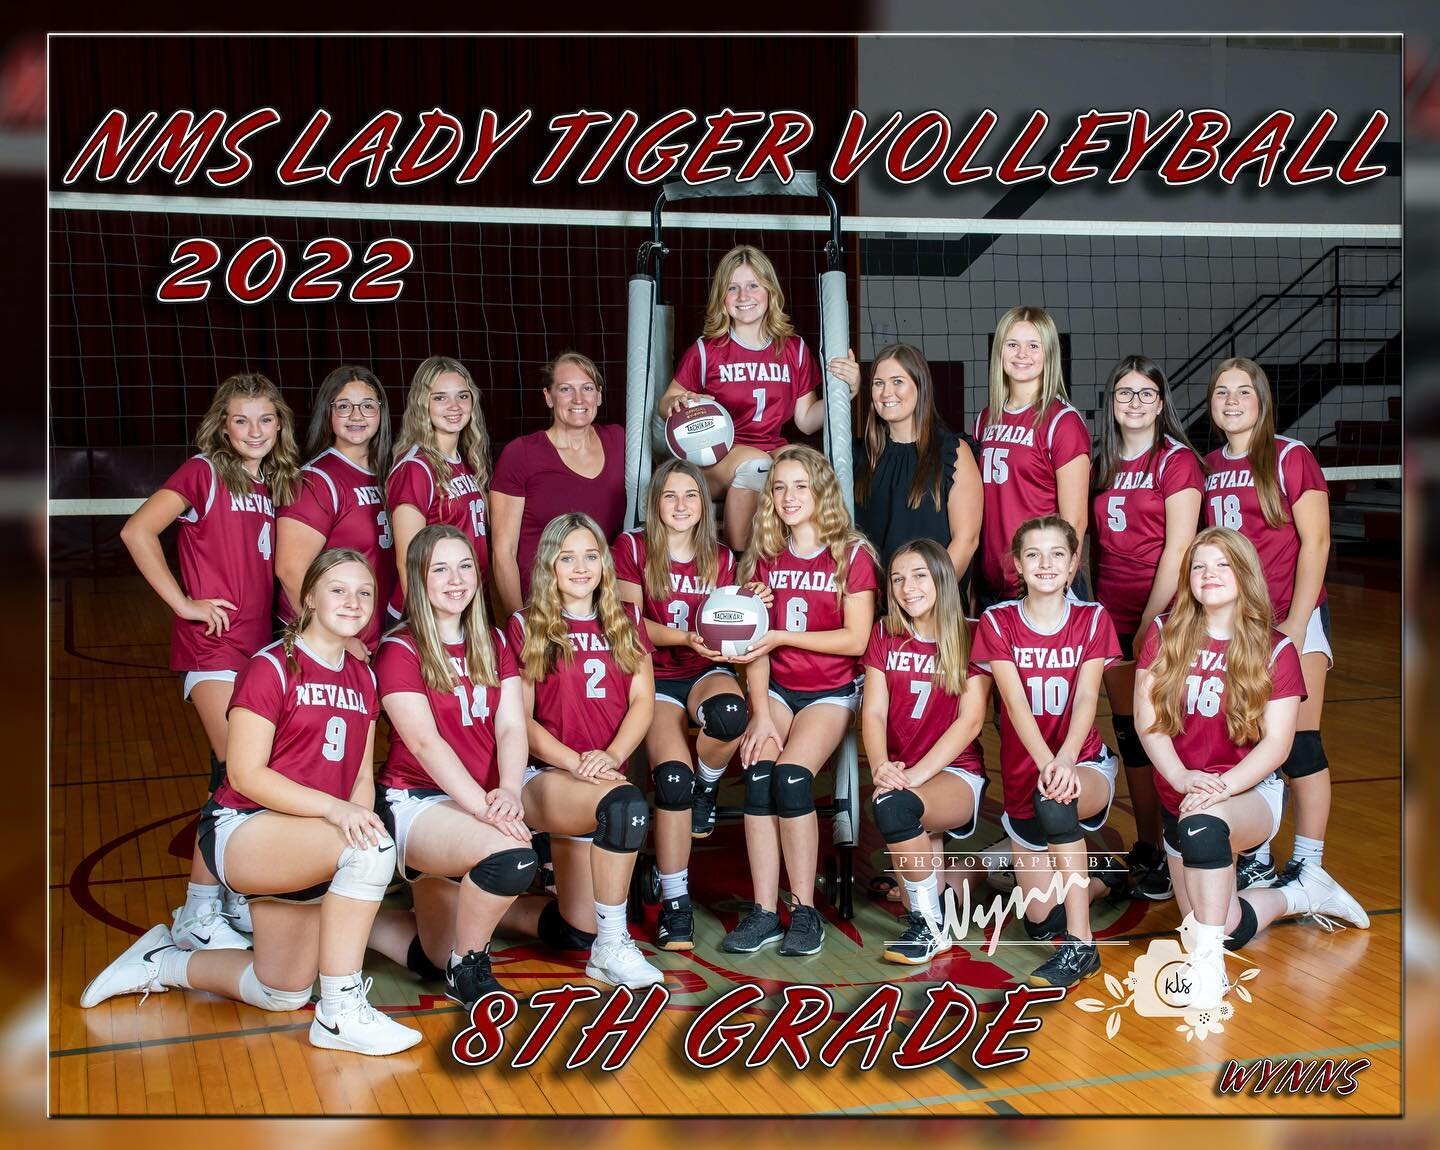 Good luck to our NMS Lady Tiger volleyball teams tonight against Adrian! 🏐🏐🏐